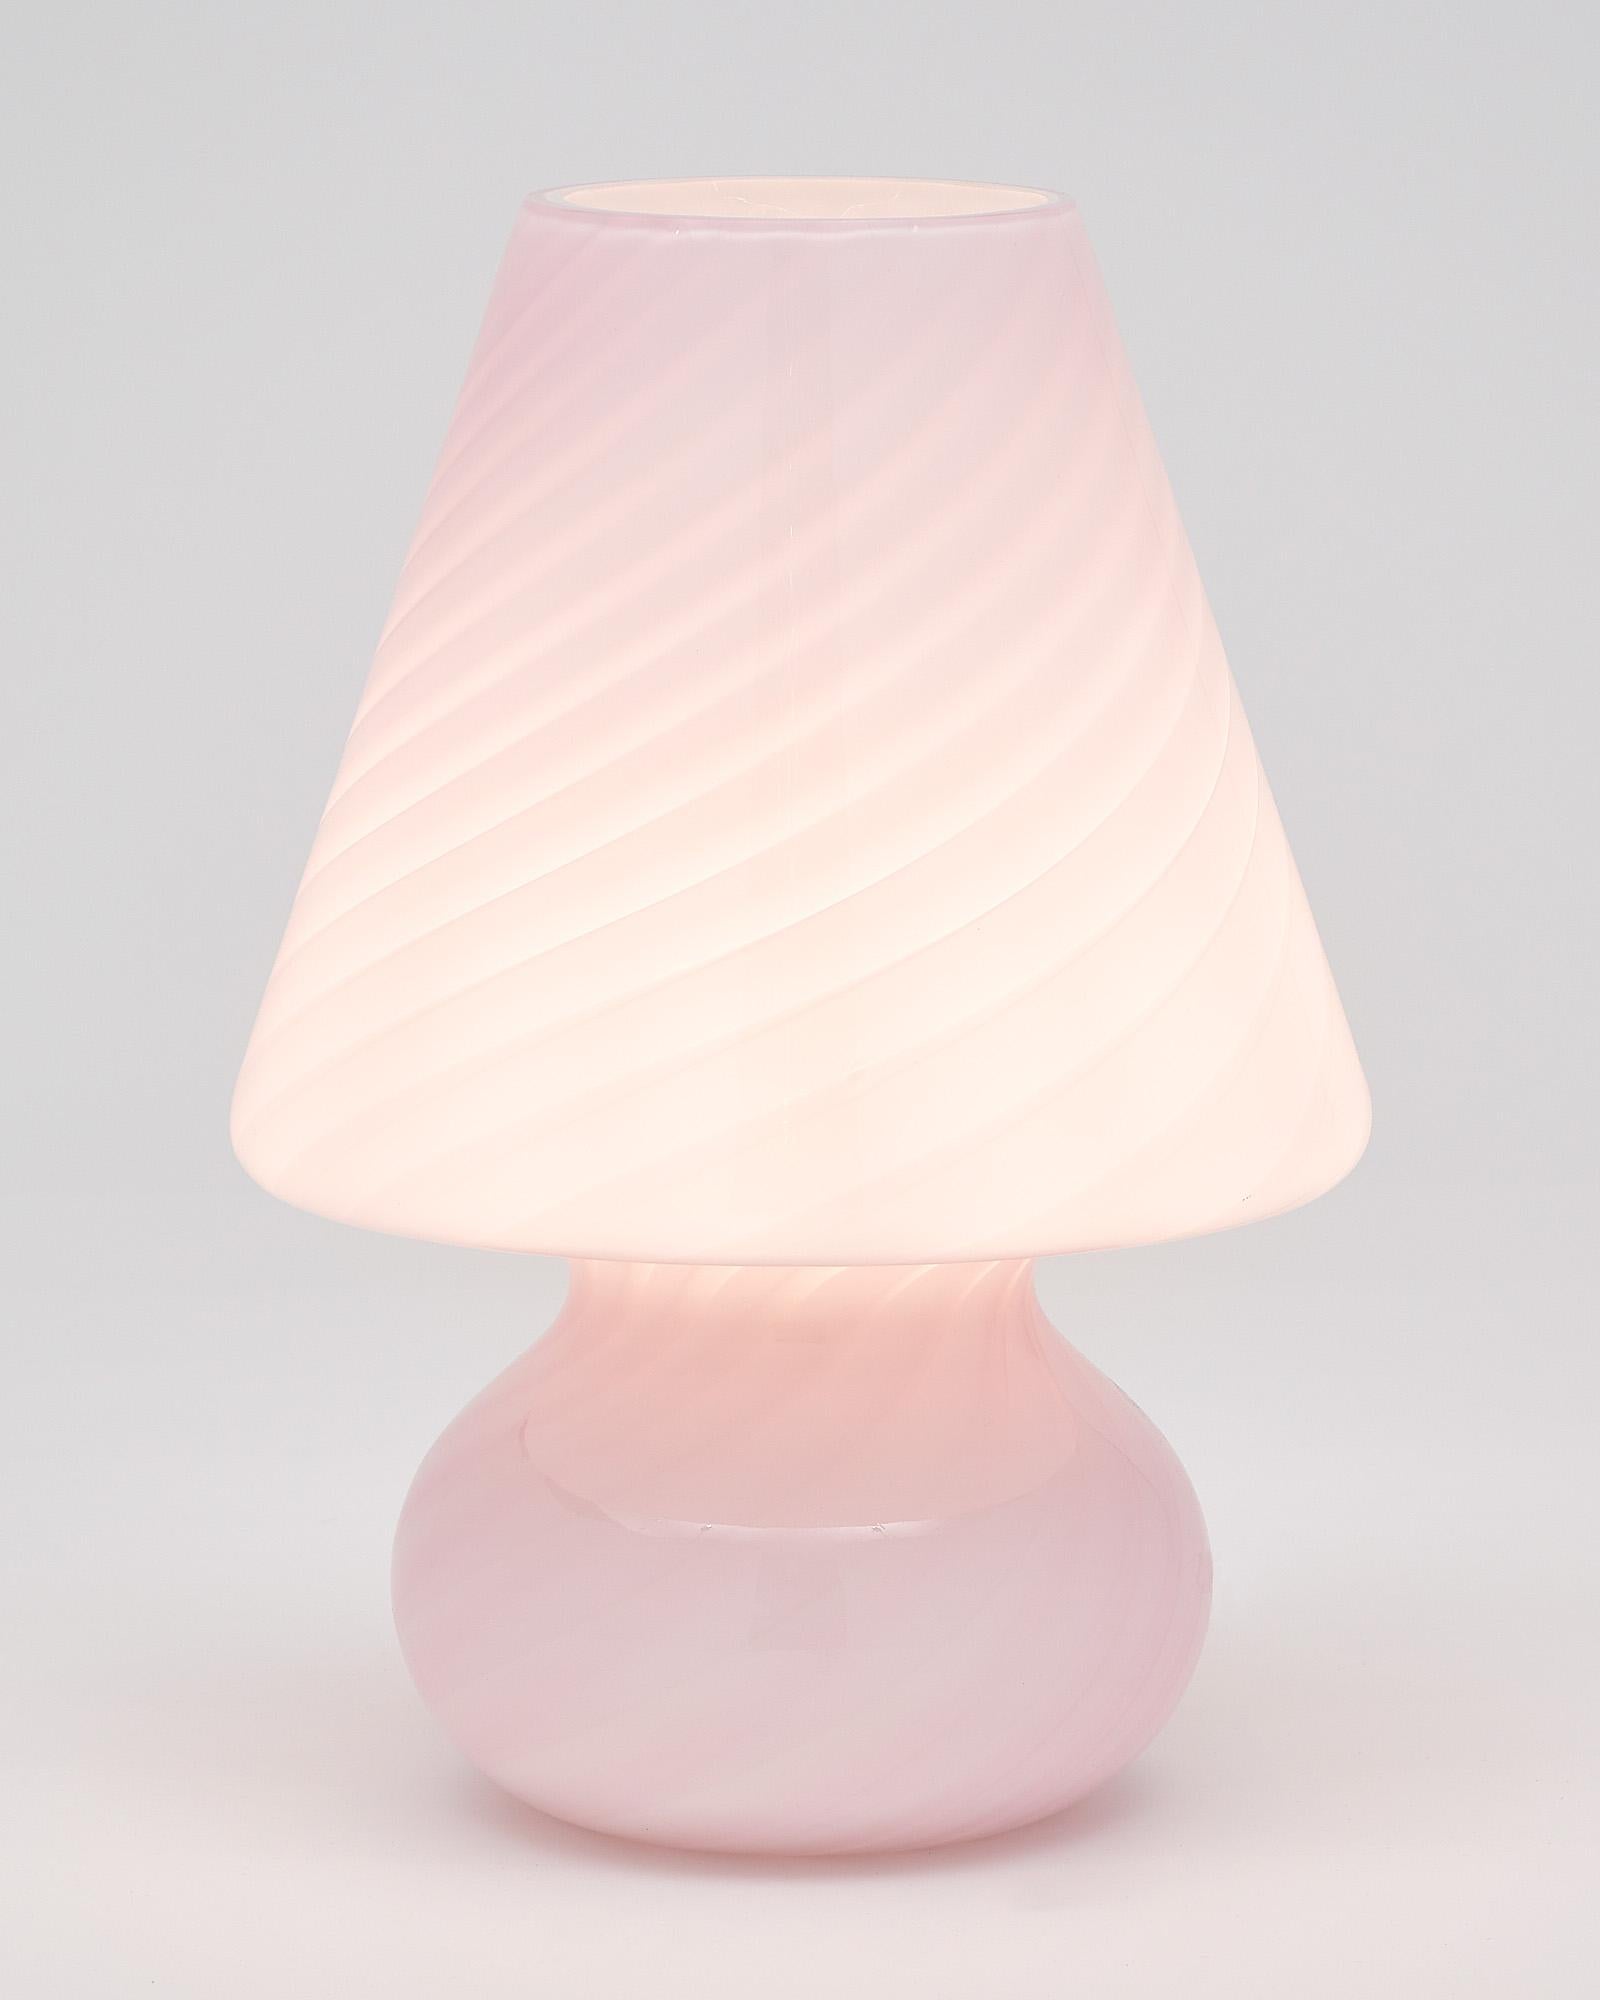 Glass lamp from the island of Murano. This hand-blown artful piece combines pink and white glass in a swirly dynamic. It has been newly wired to fit US standards.